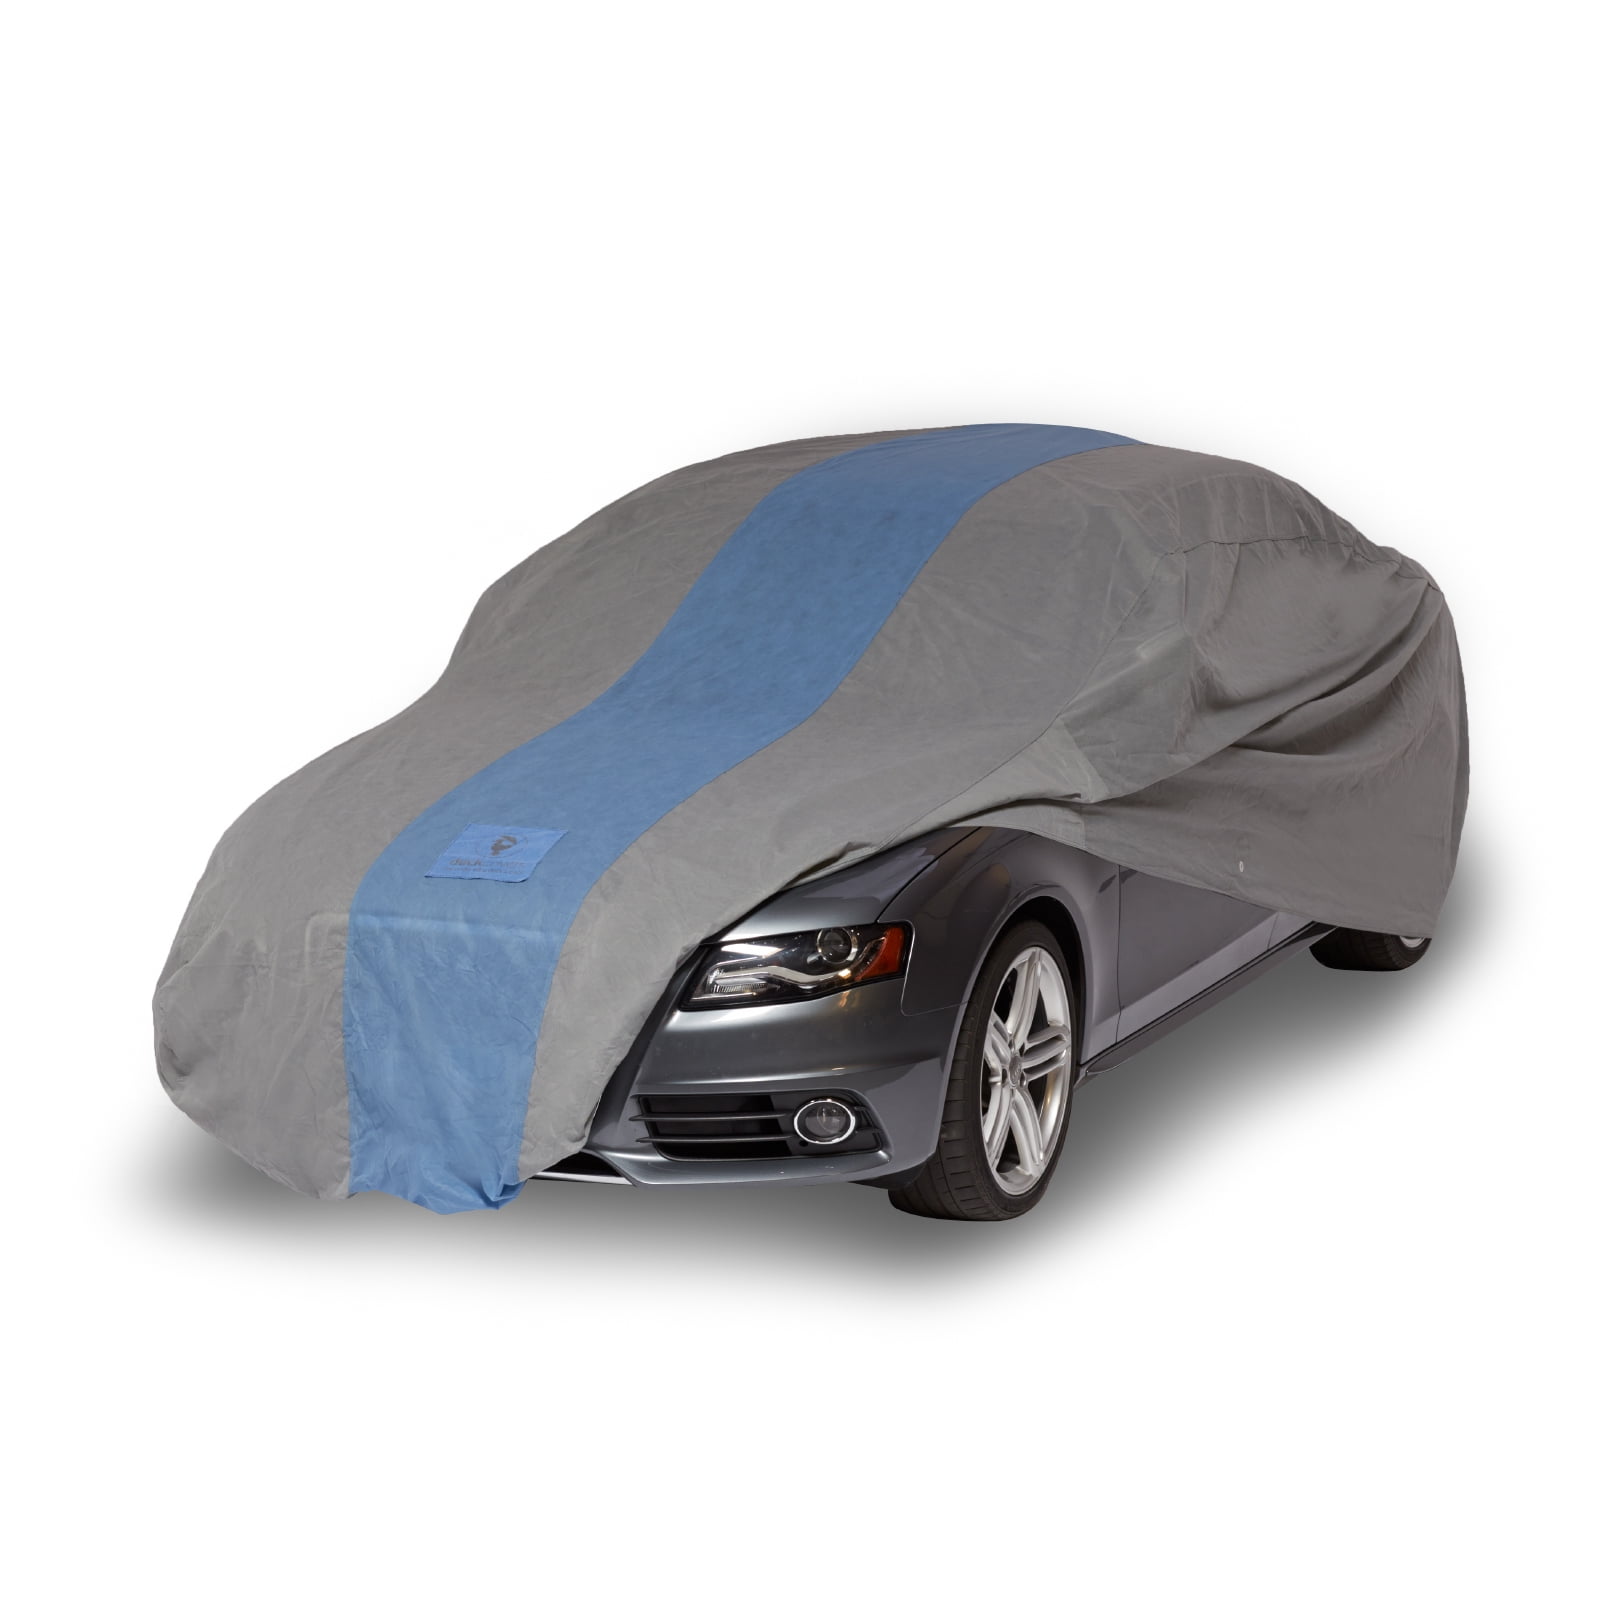 Duck Covers Defender Car Cover for Sedans up to 13 1 